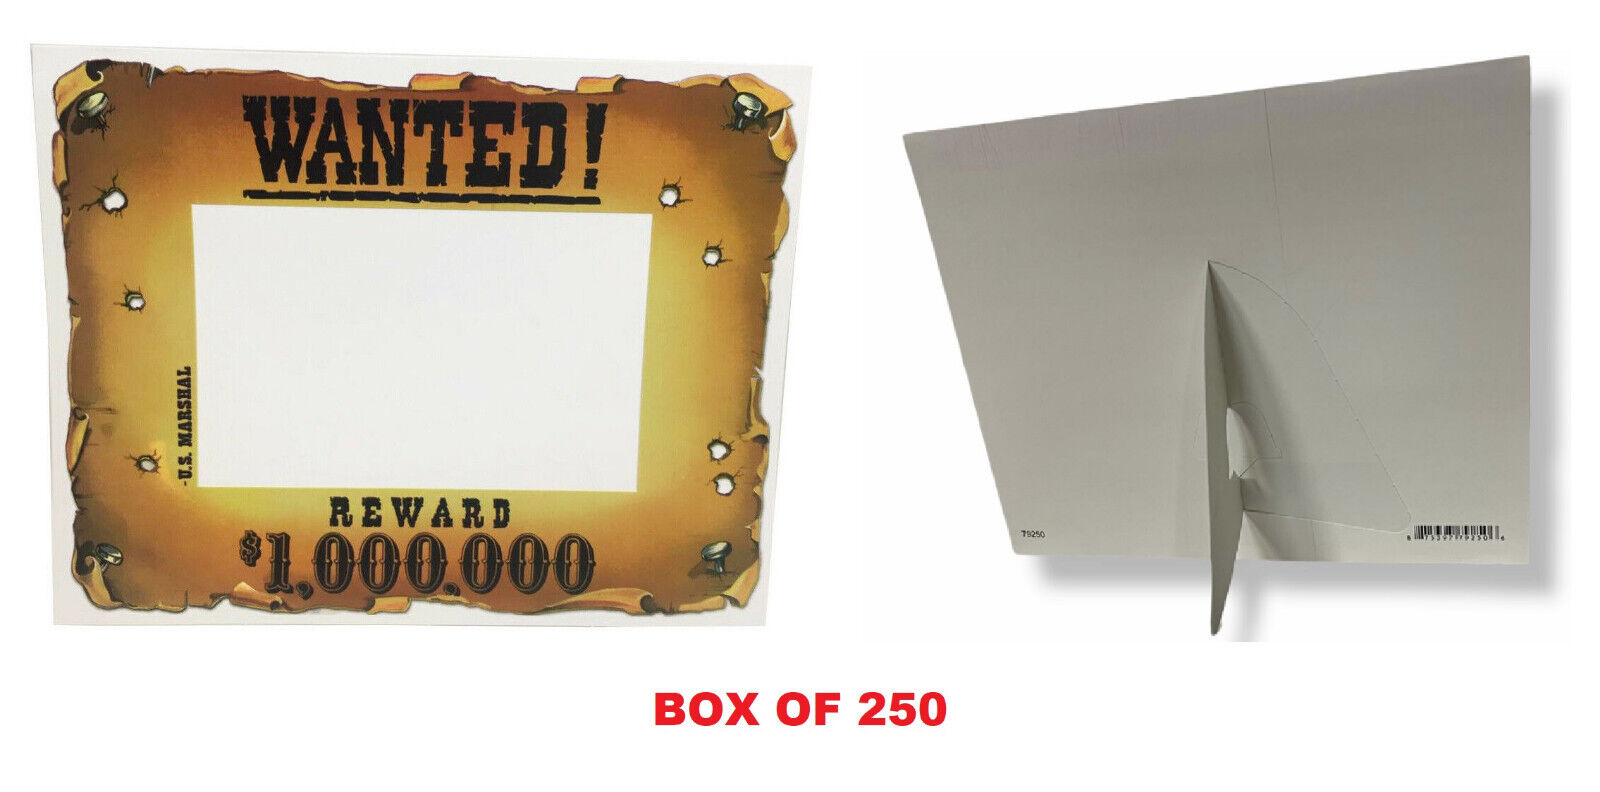 BOX OF 250  Wanted! Reward $1,000,000 4x6 inches Picture Frame Unbranded